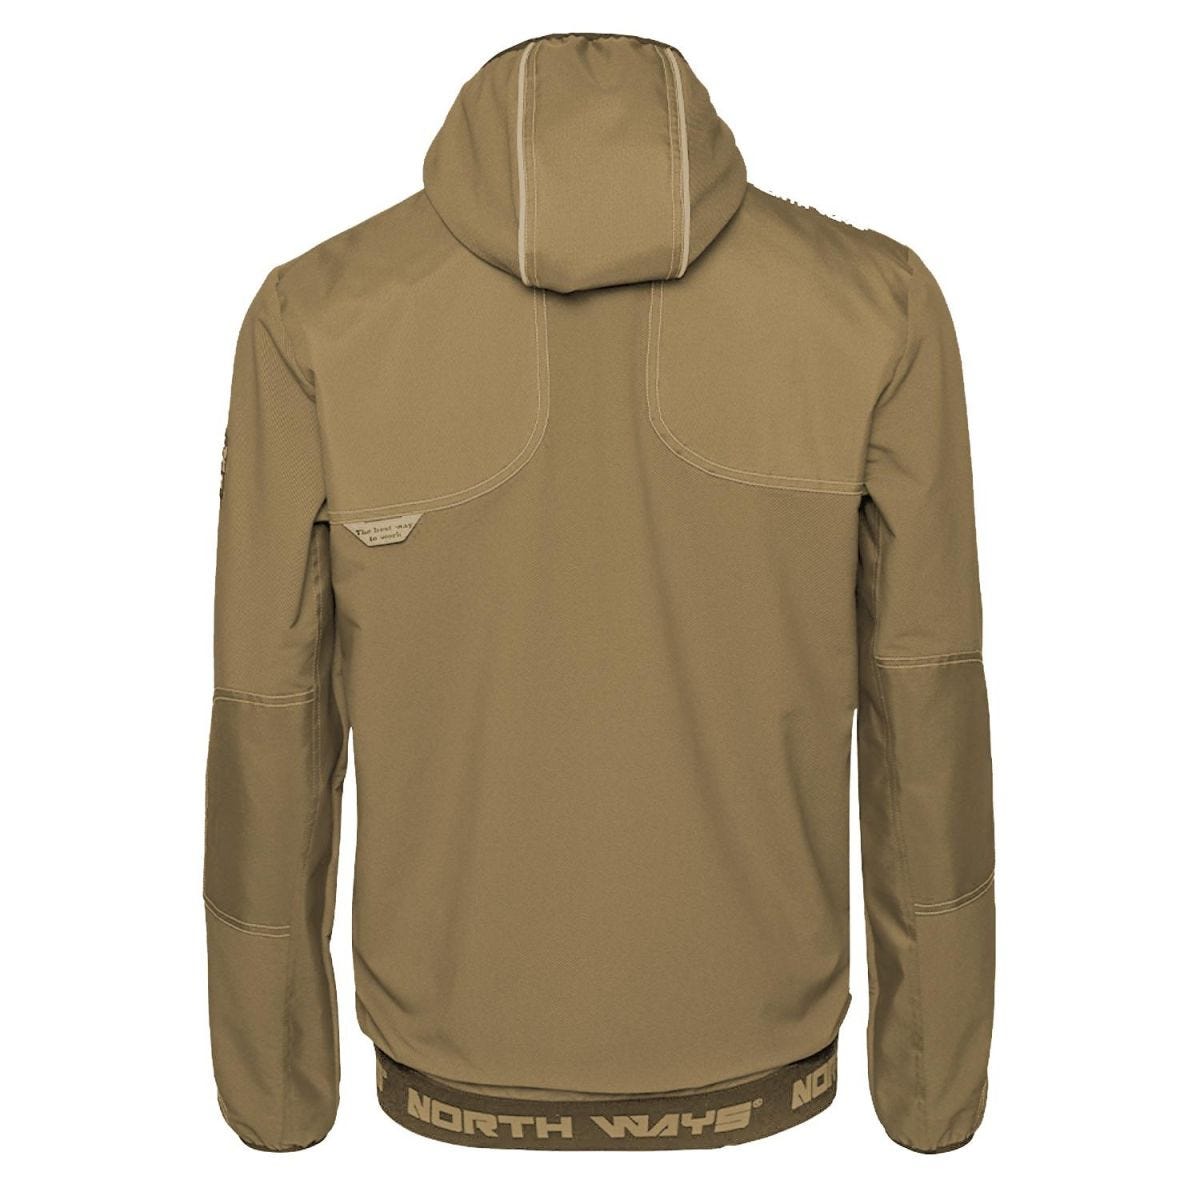 Blouson de travail multipoches Irons beige - North Ways - Taille 4XL 2